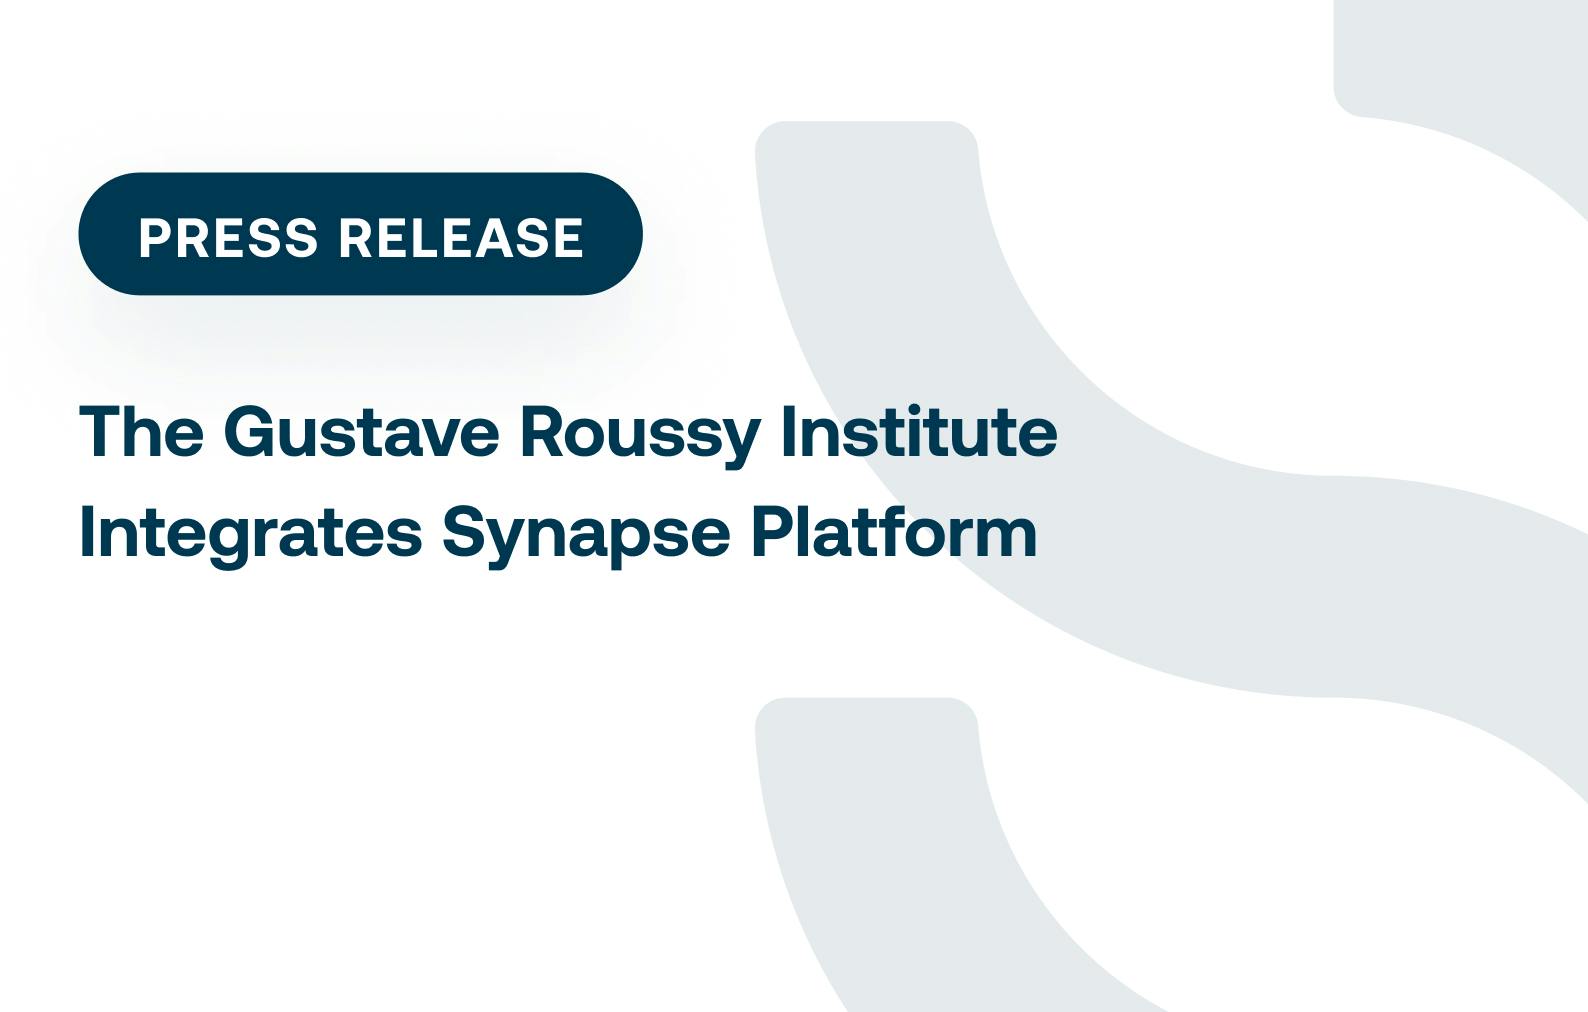 The Gustave Roussy Institute Integrates Synapse Platform  